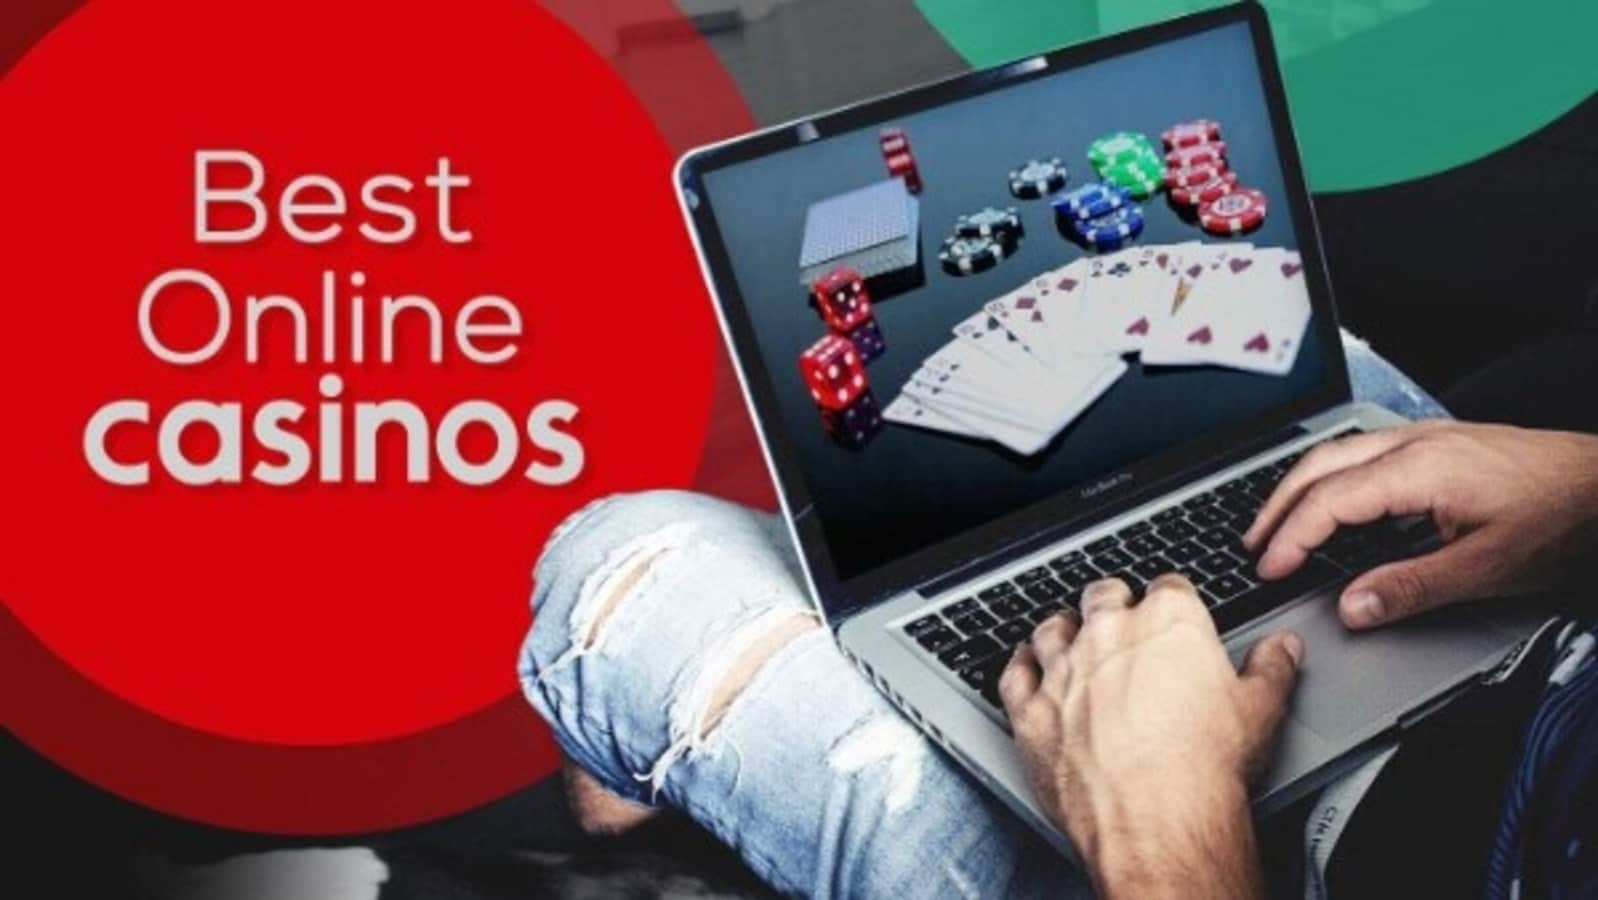 casinos Is Bound To Make An Impact In Your Business